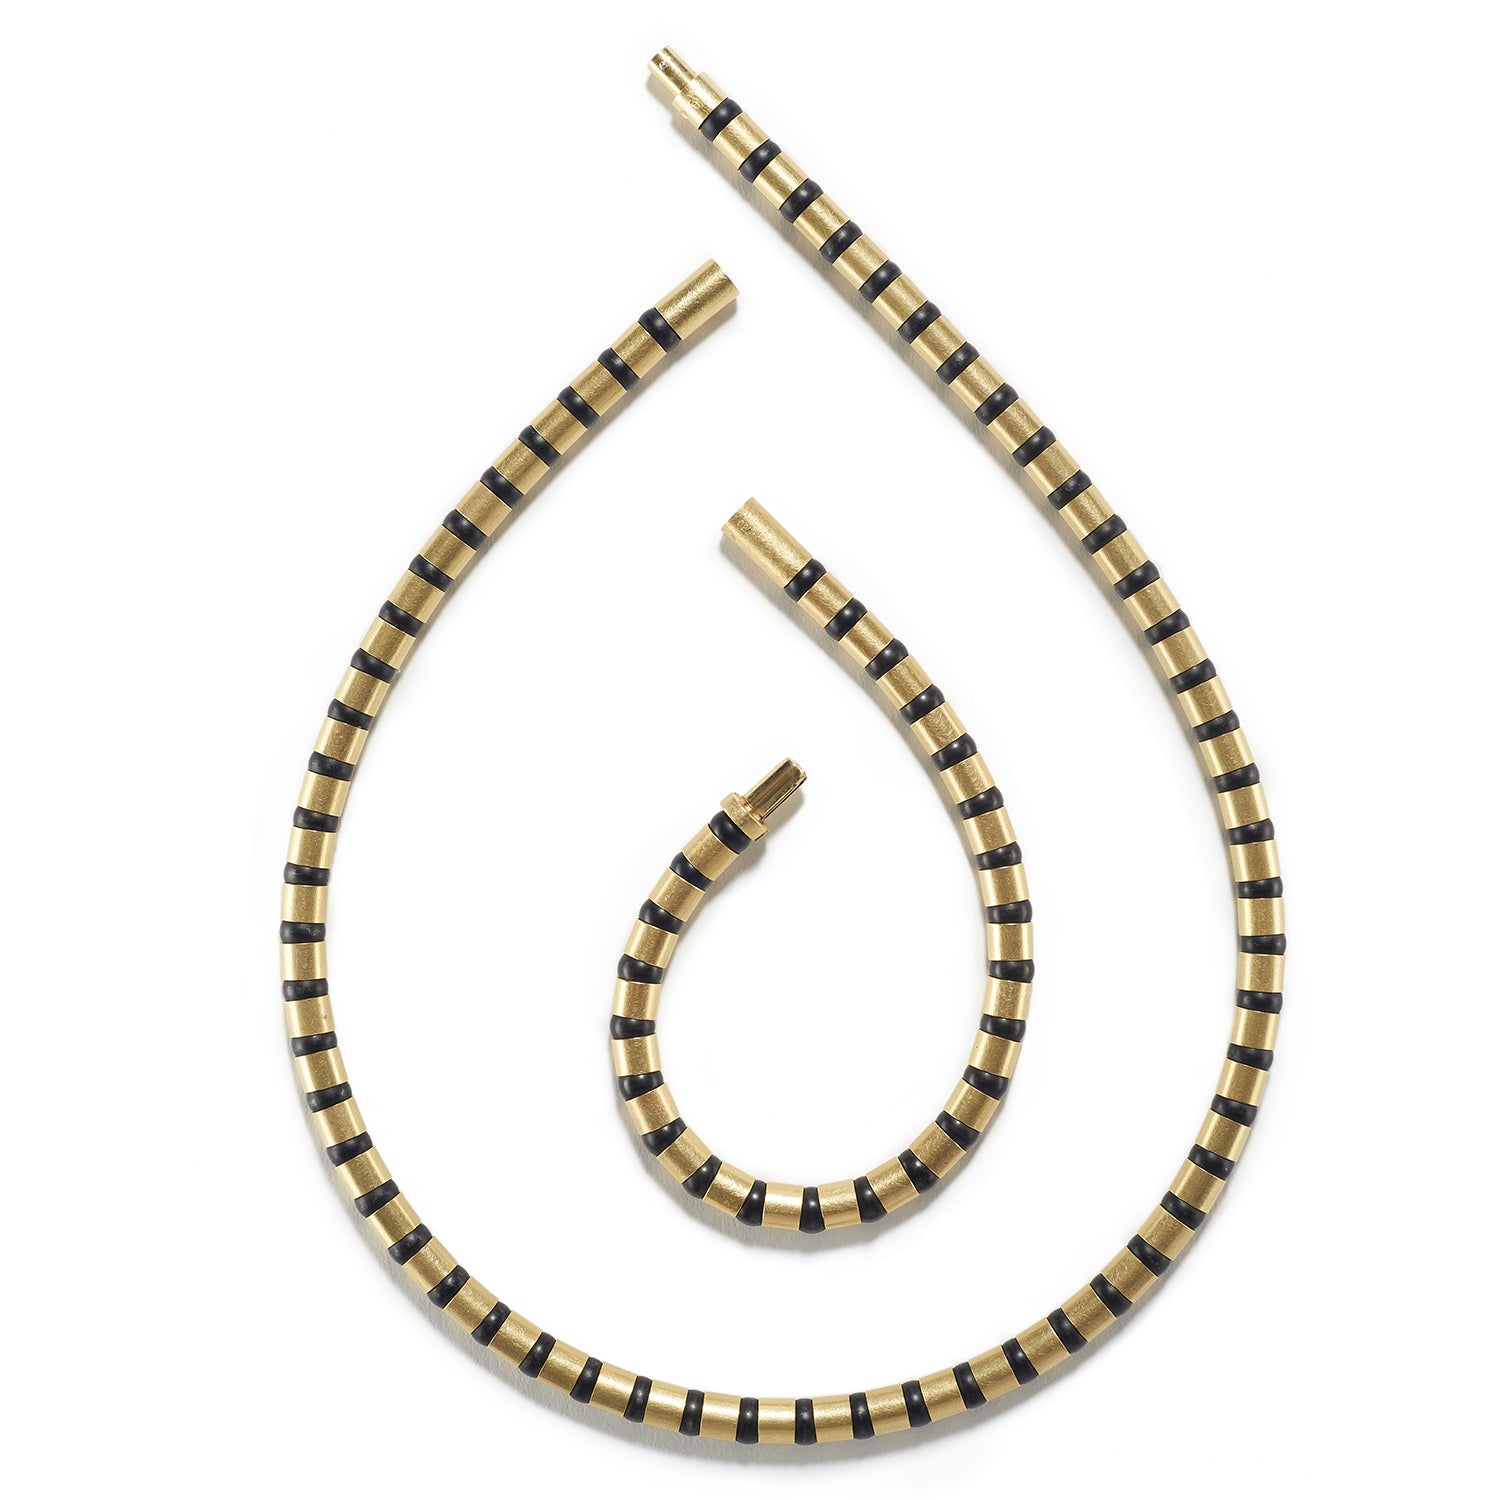 Cleopatra Gold Collier~6mm Black Onyx